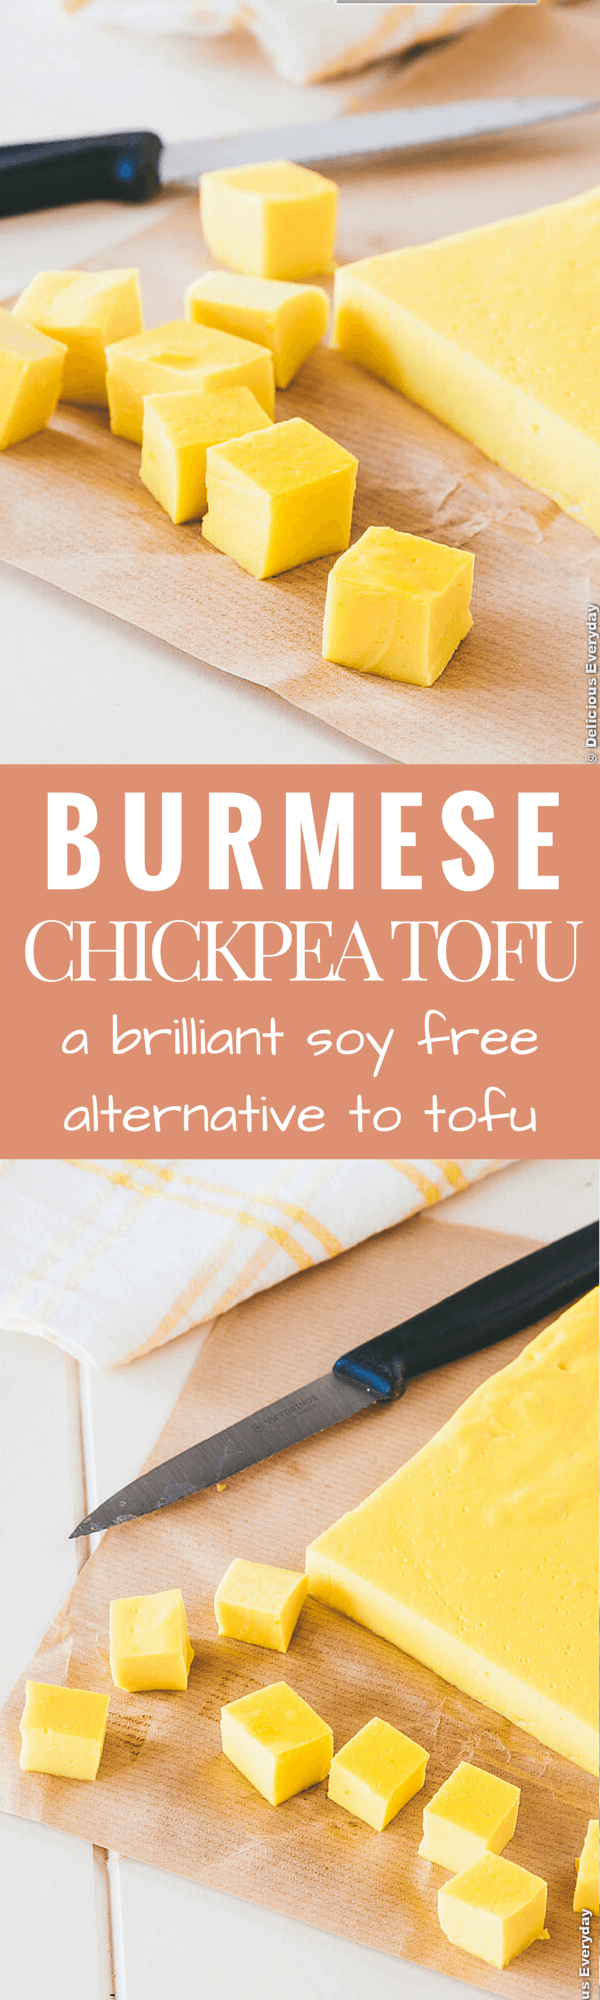 Looking for a soy free alternative to tofu? This Burmese Chickpea Tofu is easy to make and is a healthy and delicious source of protein. Great in salads, stir fries and soups. | Get the recipe at Delicious Everyday